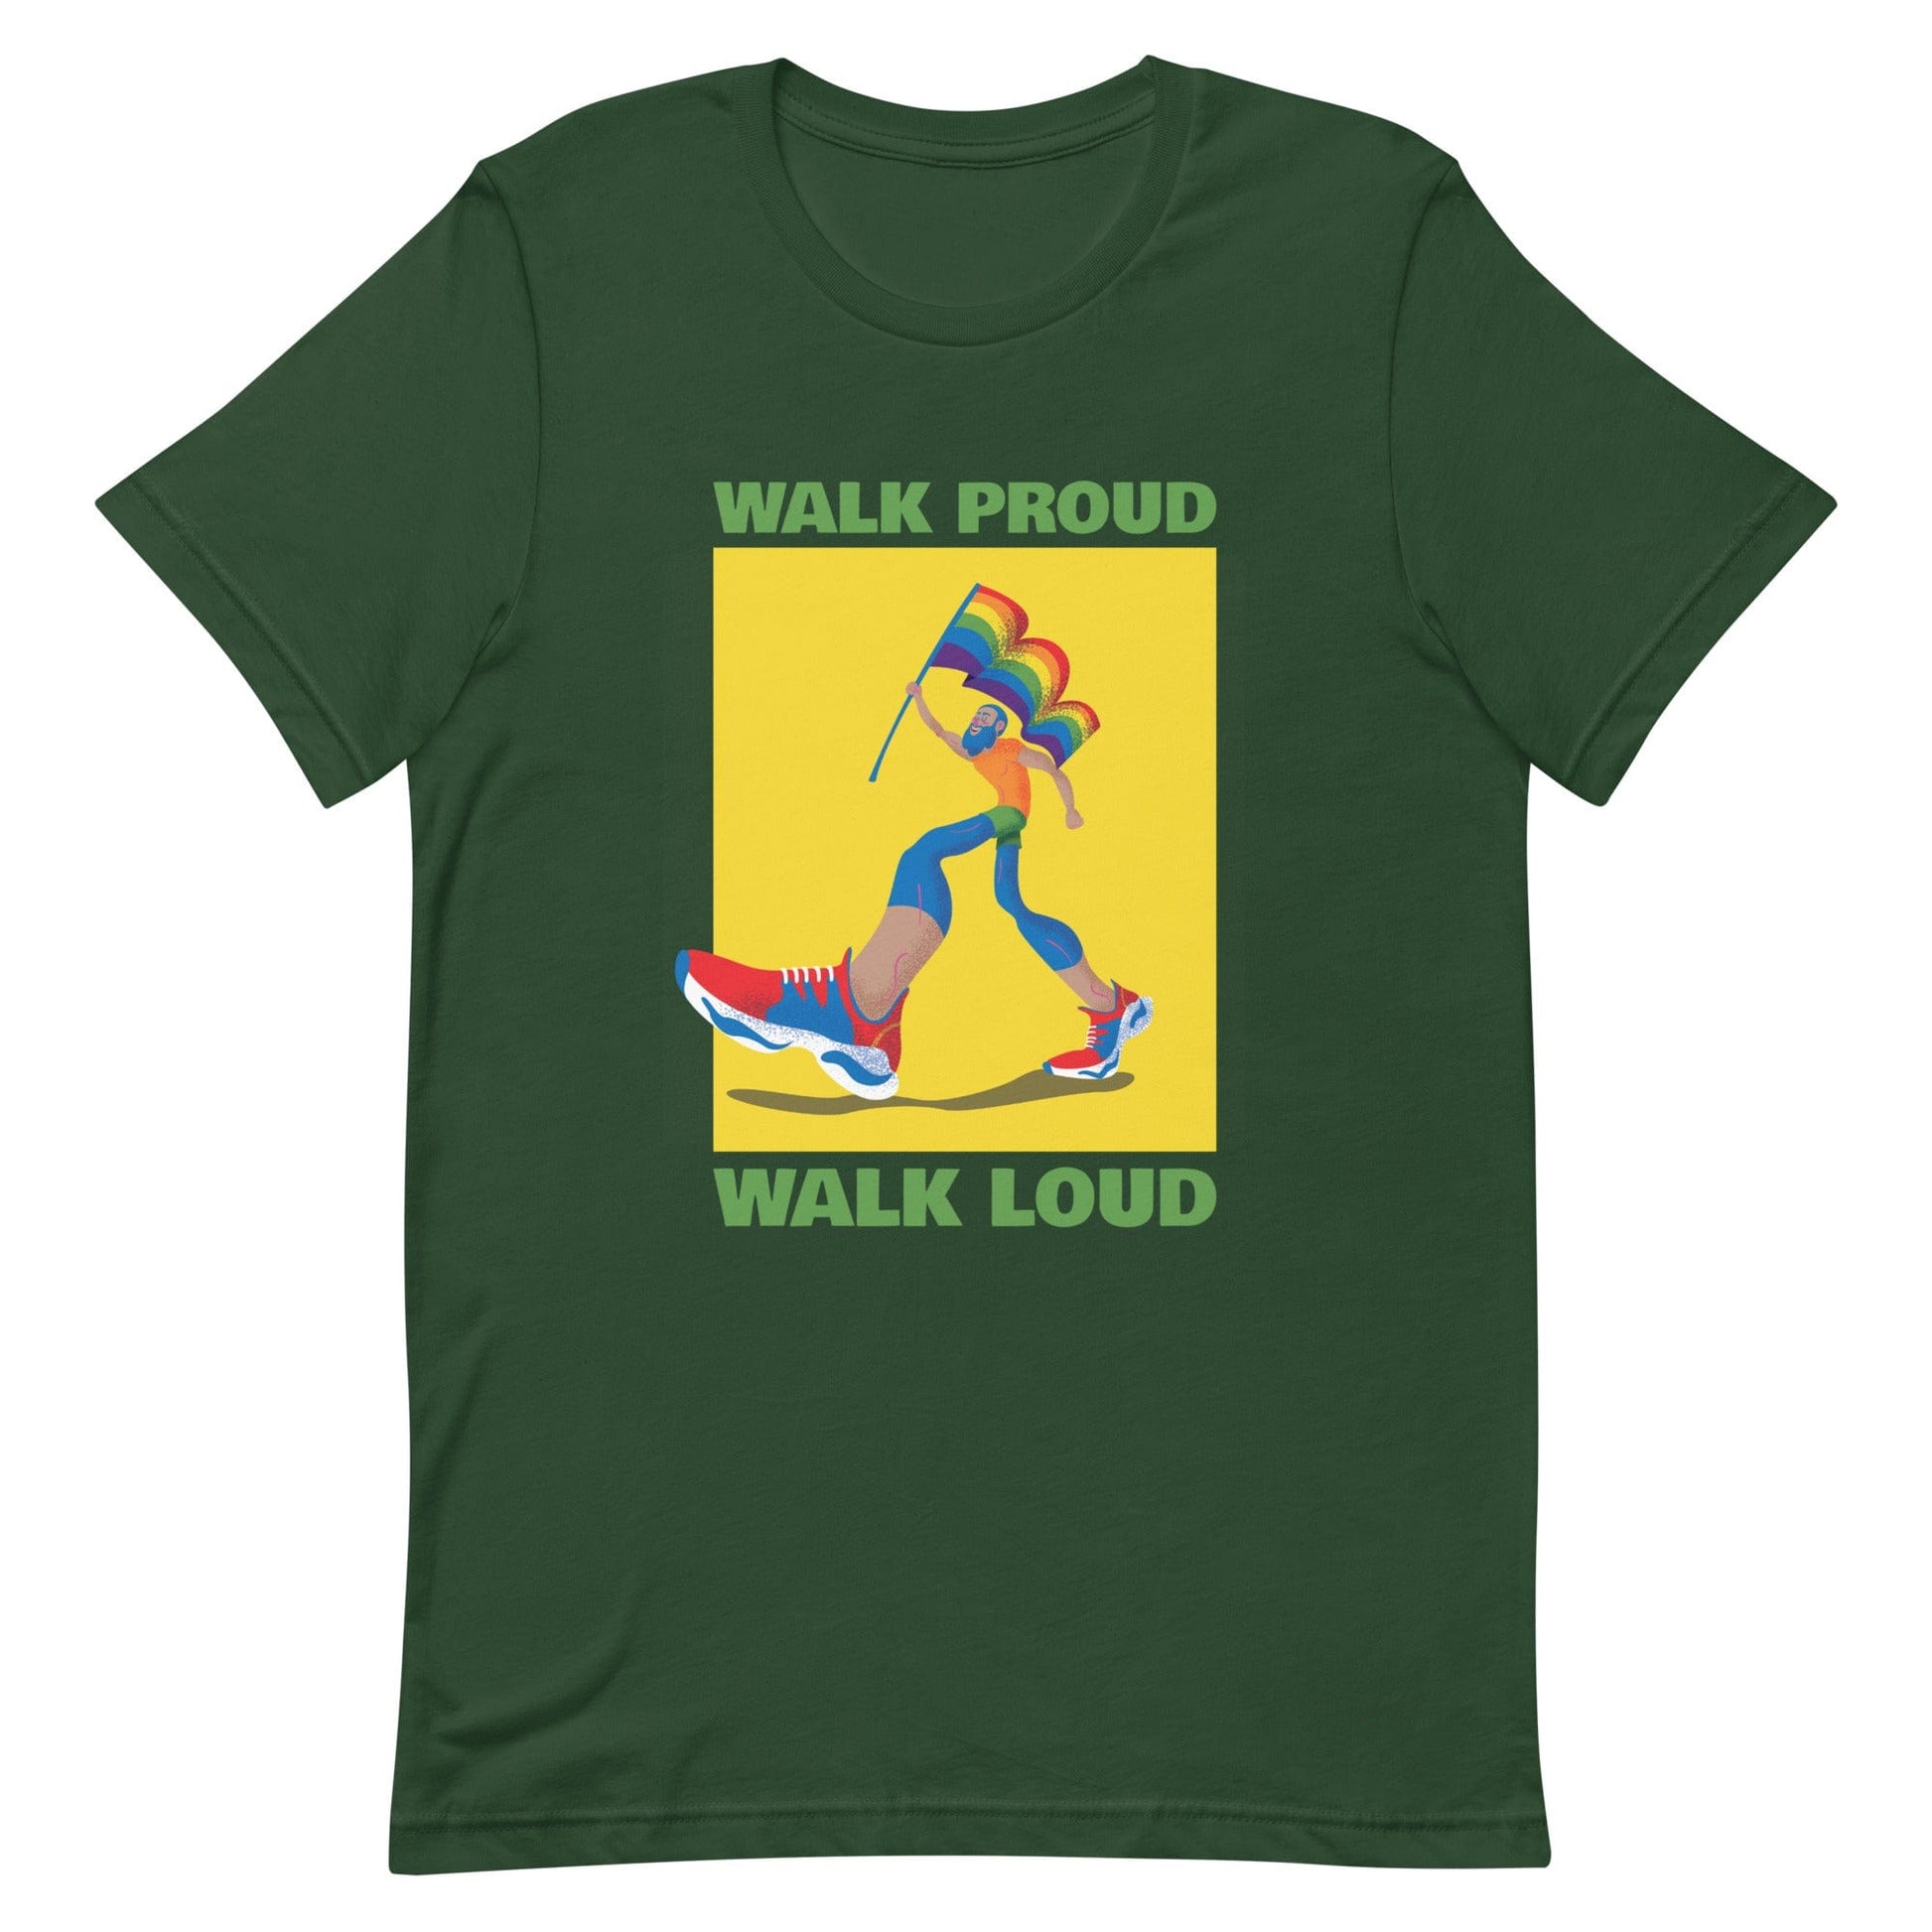 queer-pride-t-shirt-walk-proud-walk-loud-lgbtq-gay-apparel-green-forest-front